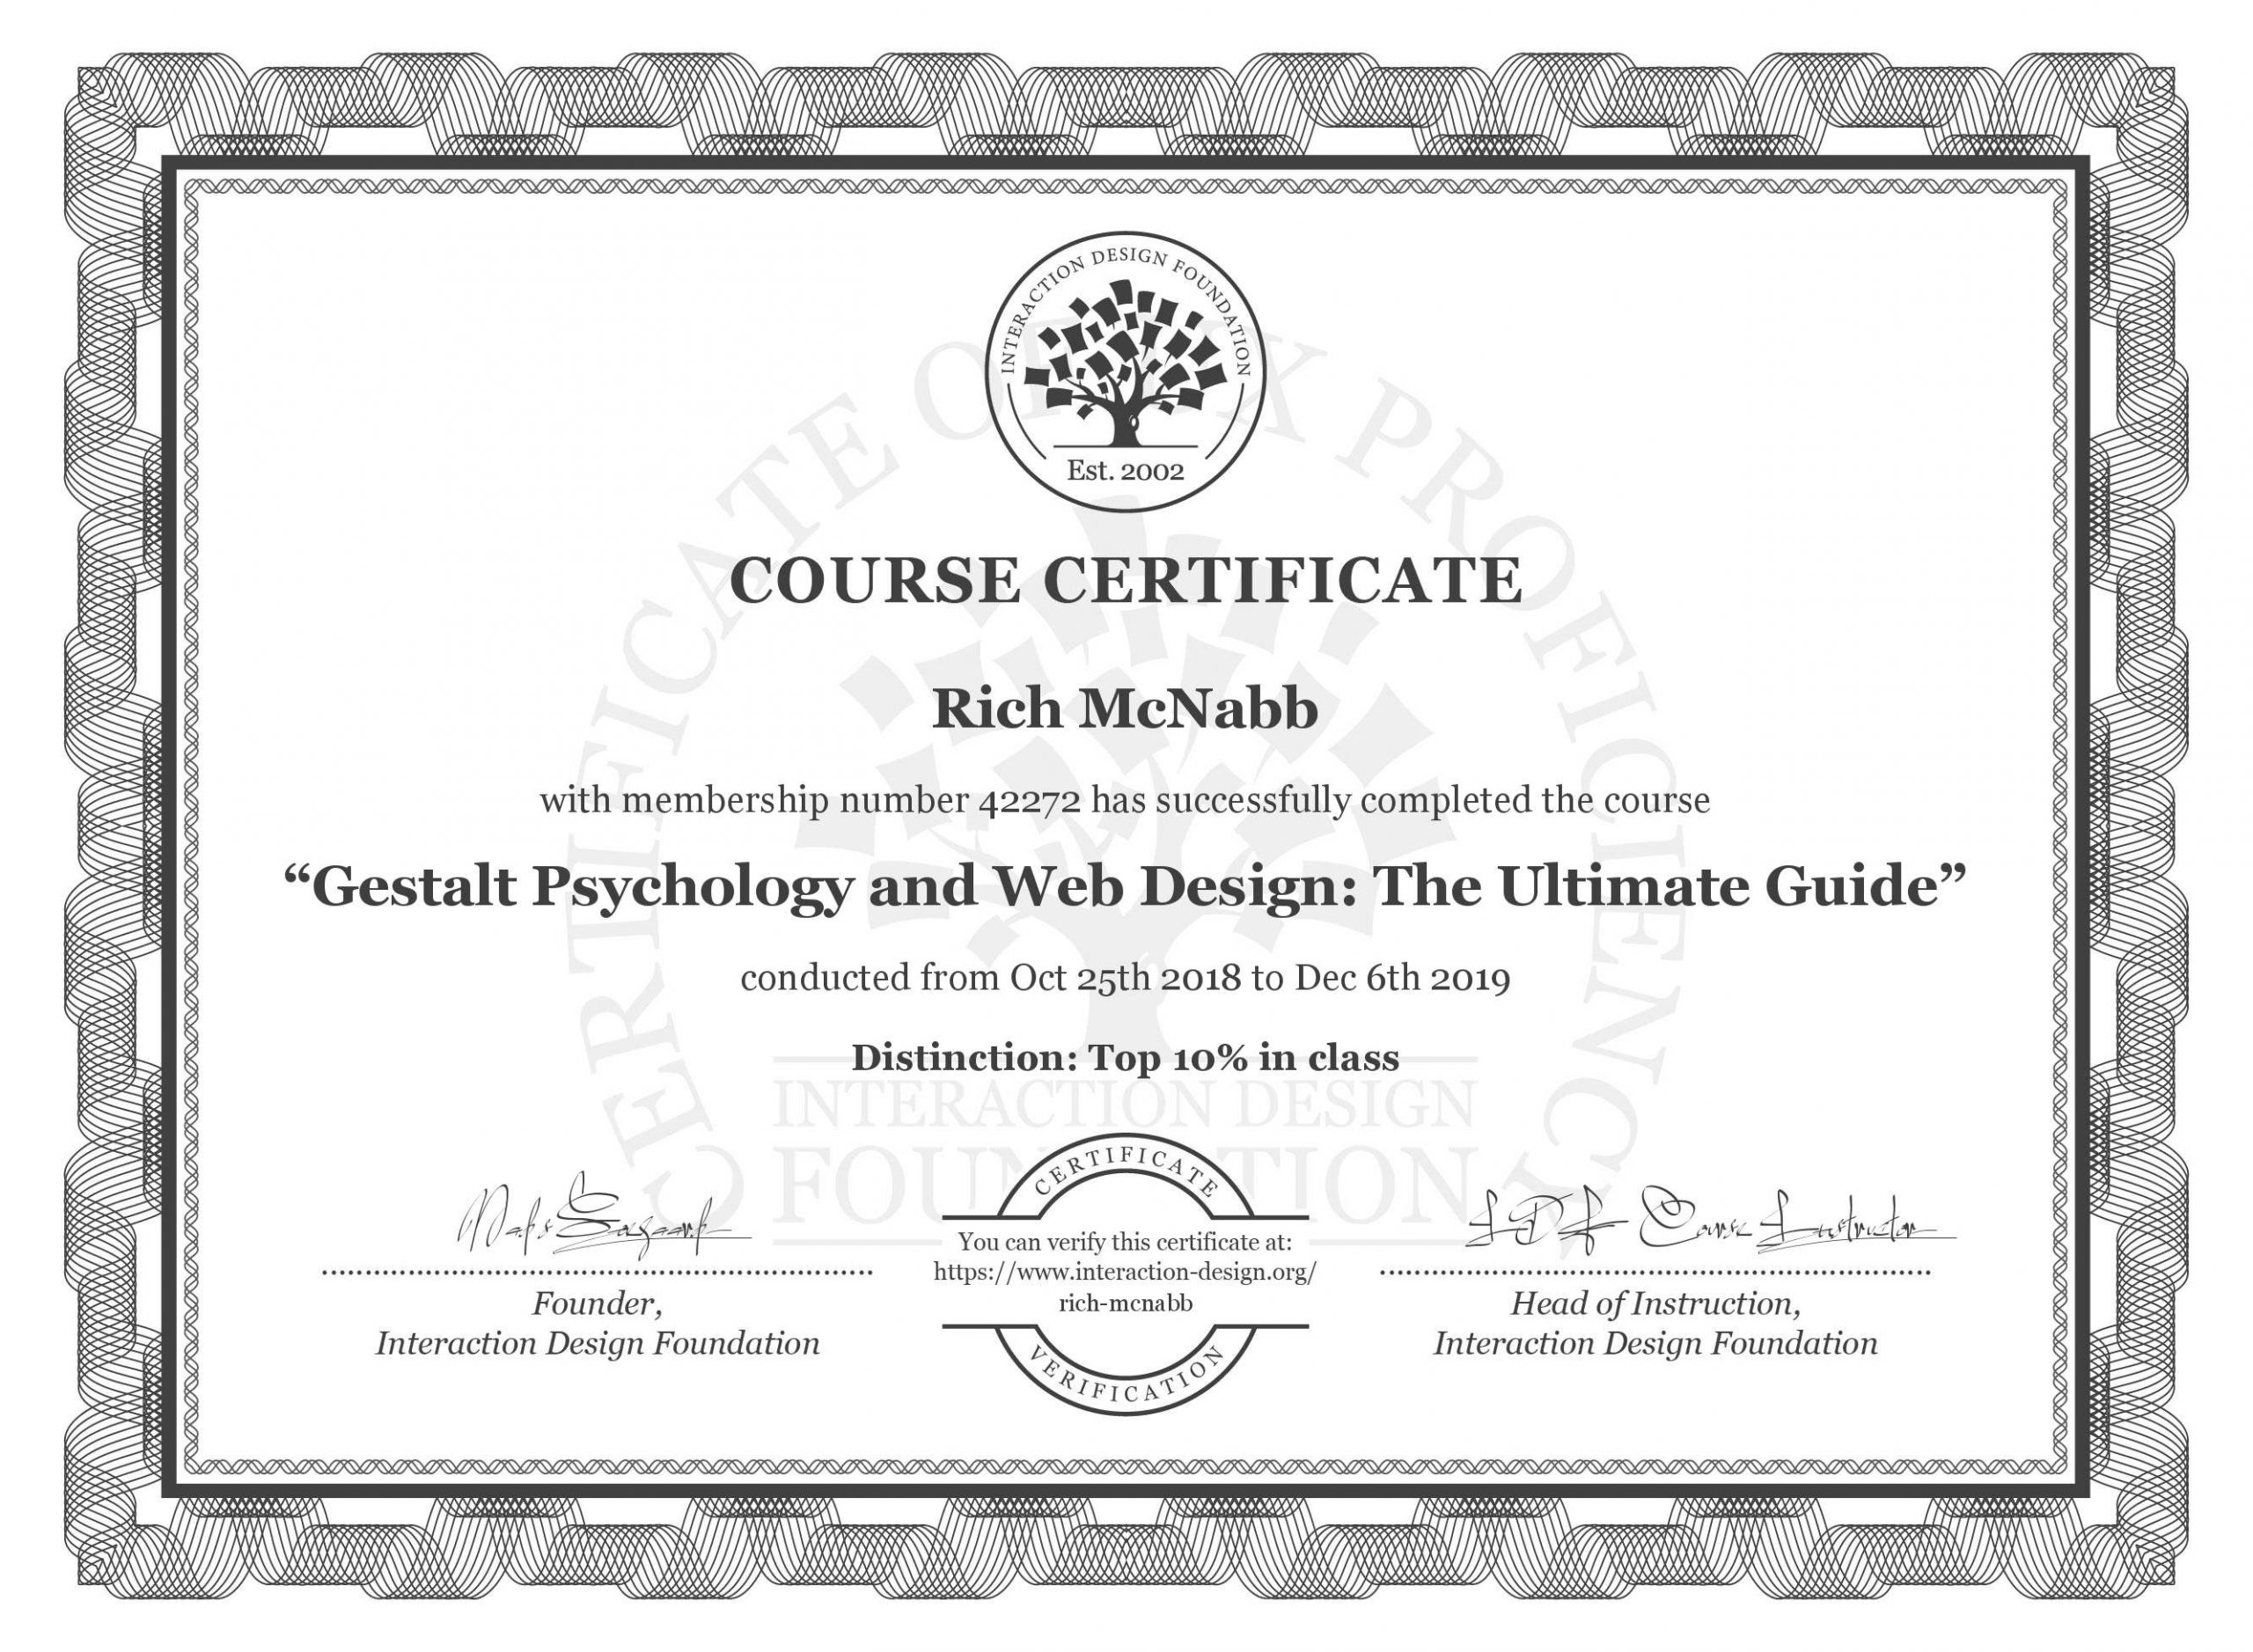 Rich McNabb - Gestalt Psychology and Web Design - The Ultimate Guide